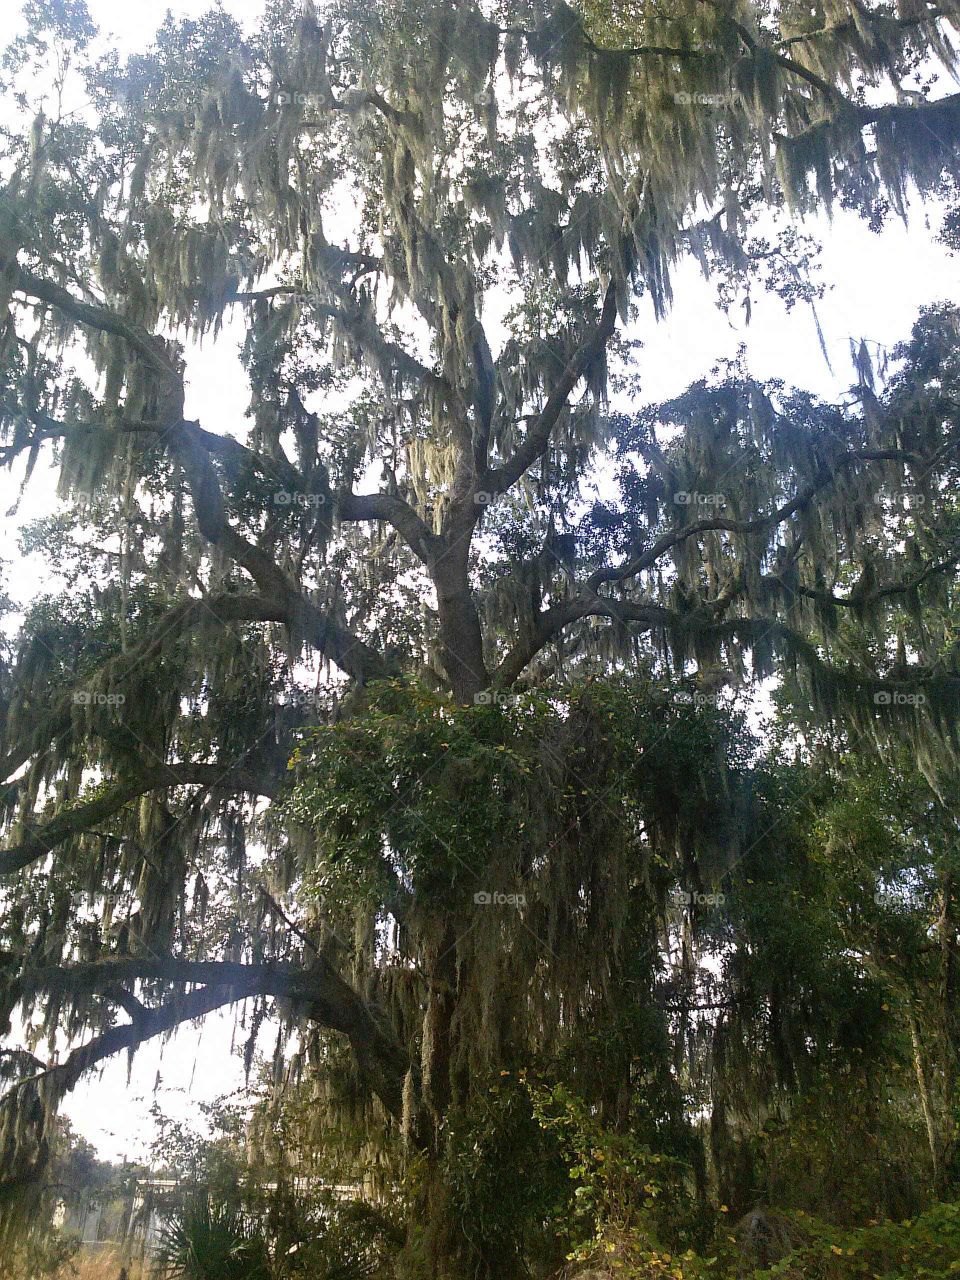 an old oak in Florida